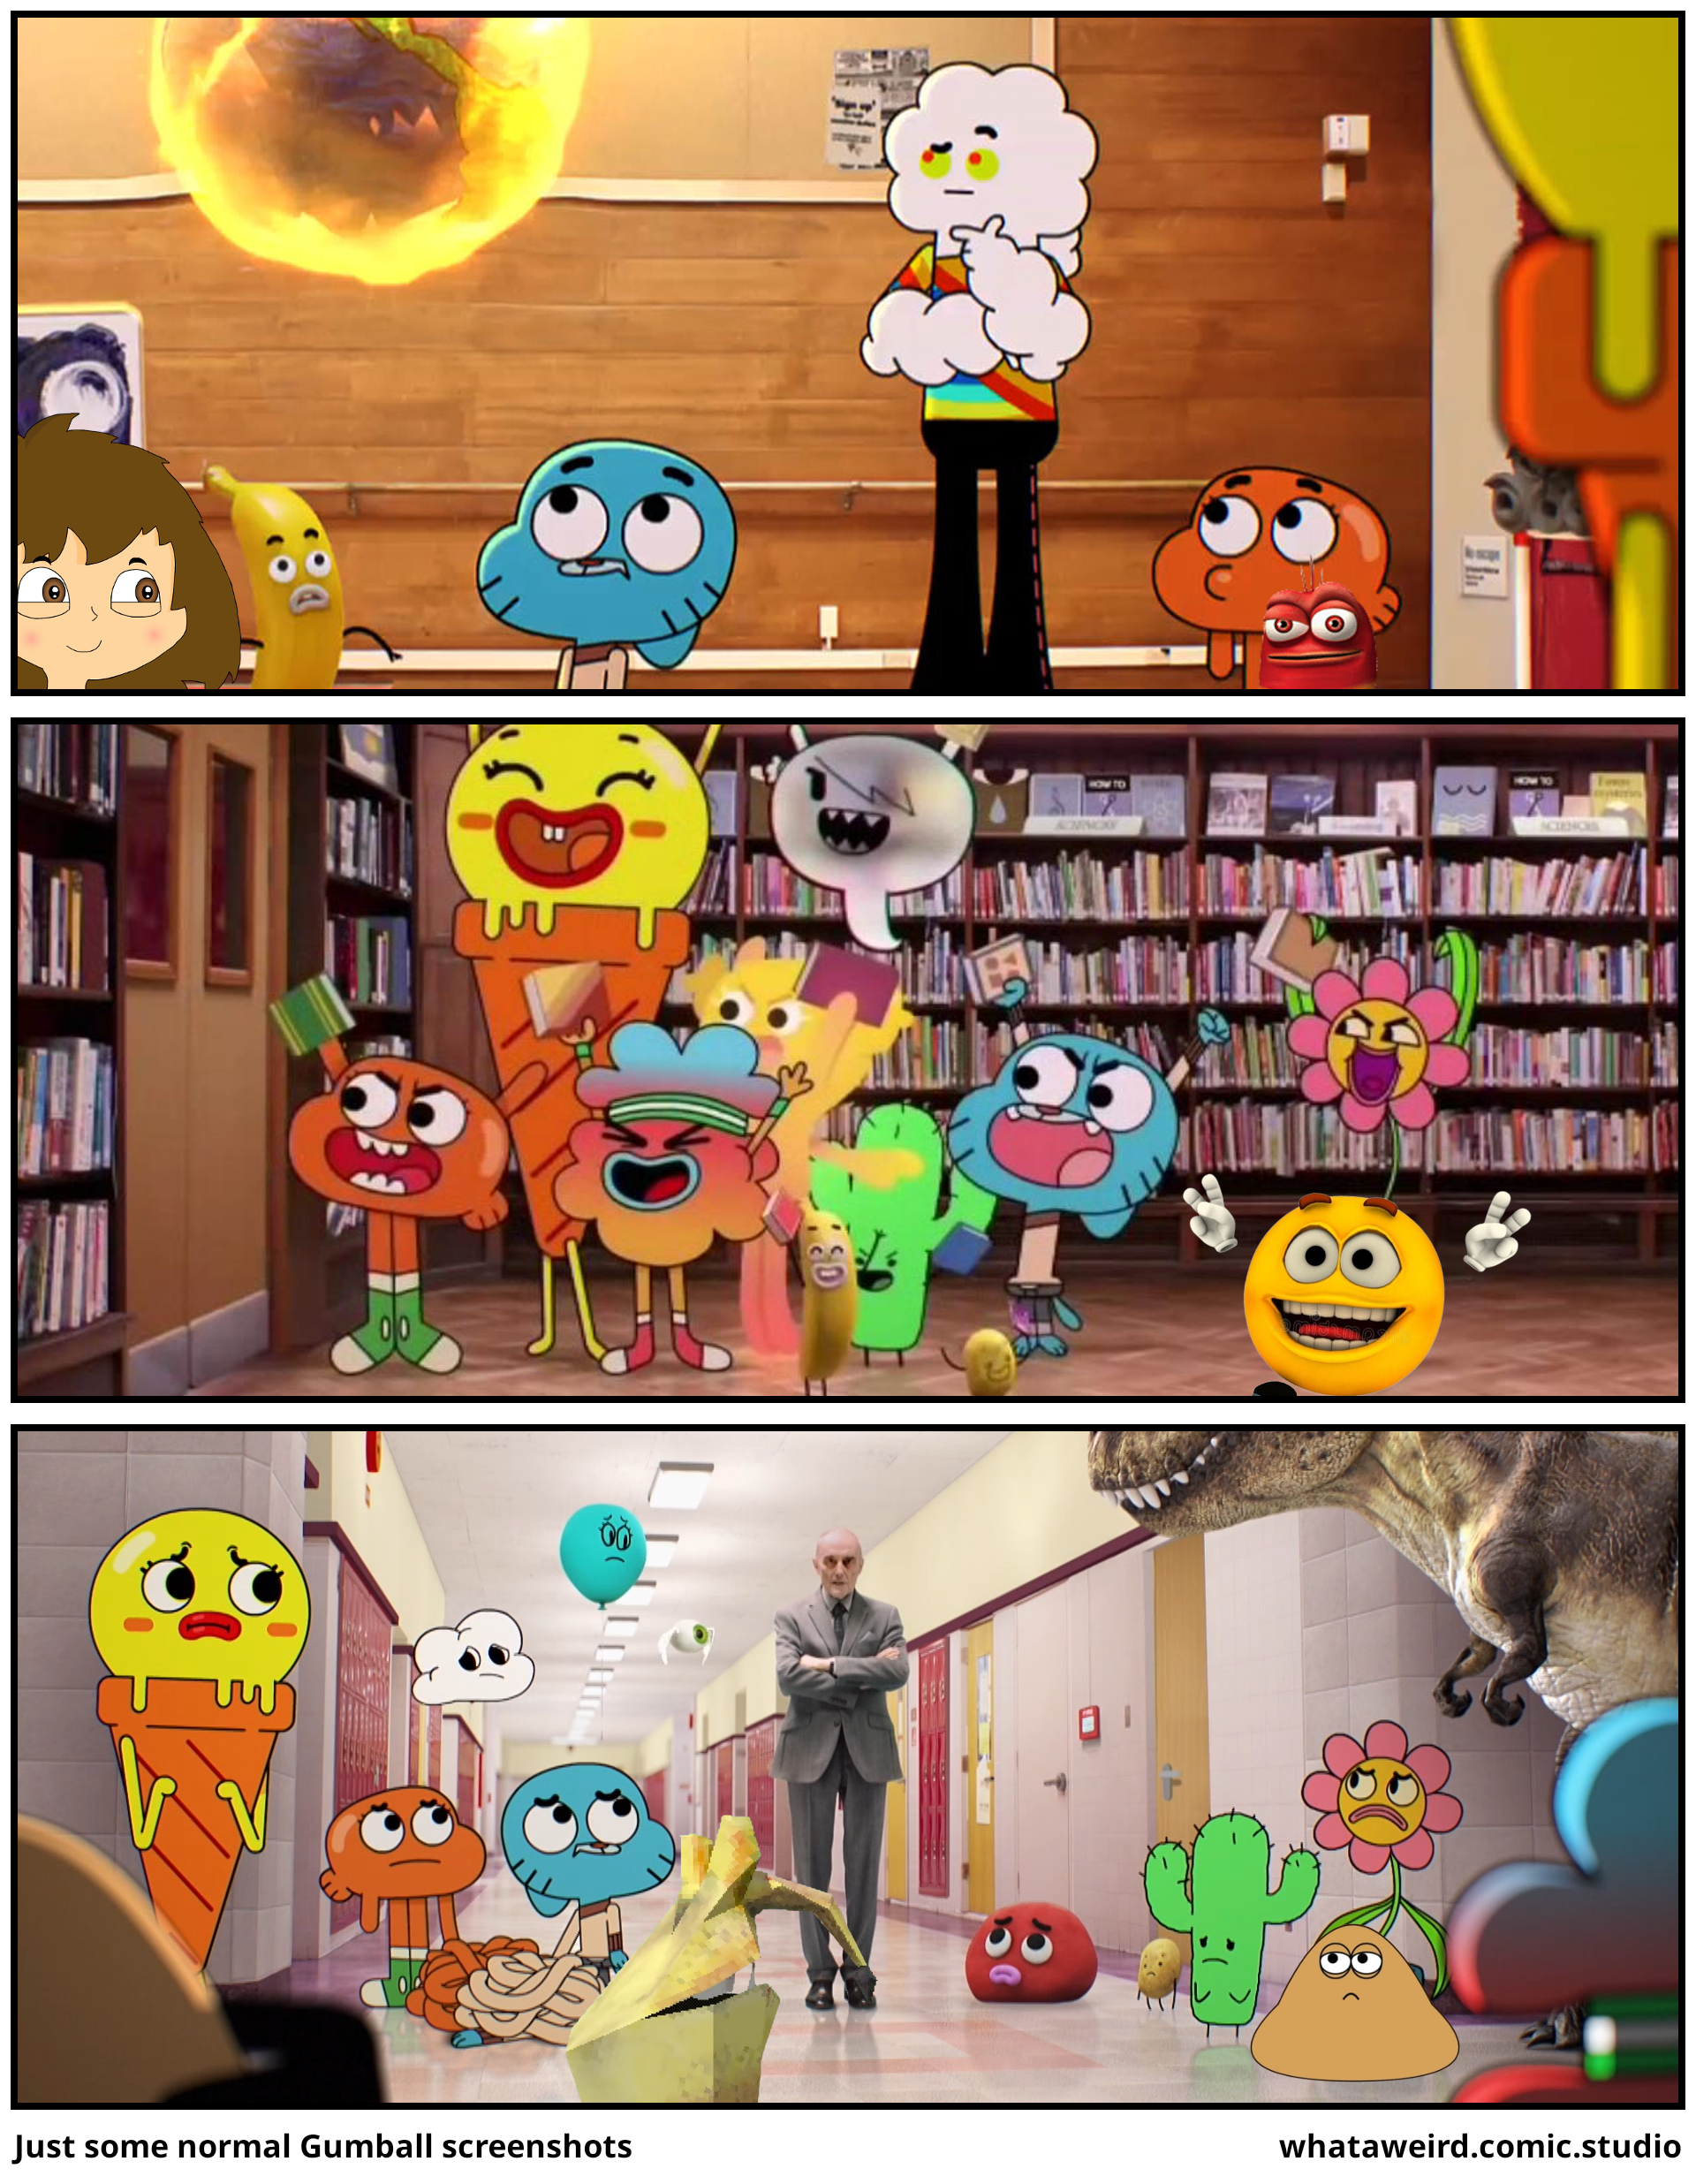 Just some normal Gumball screenshots